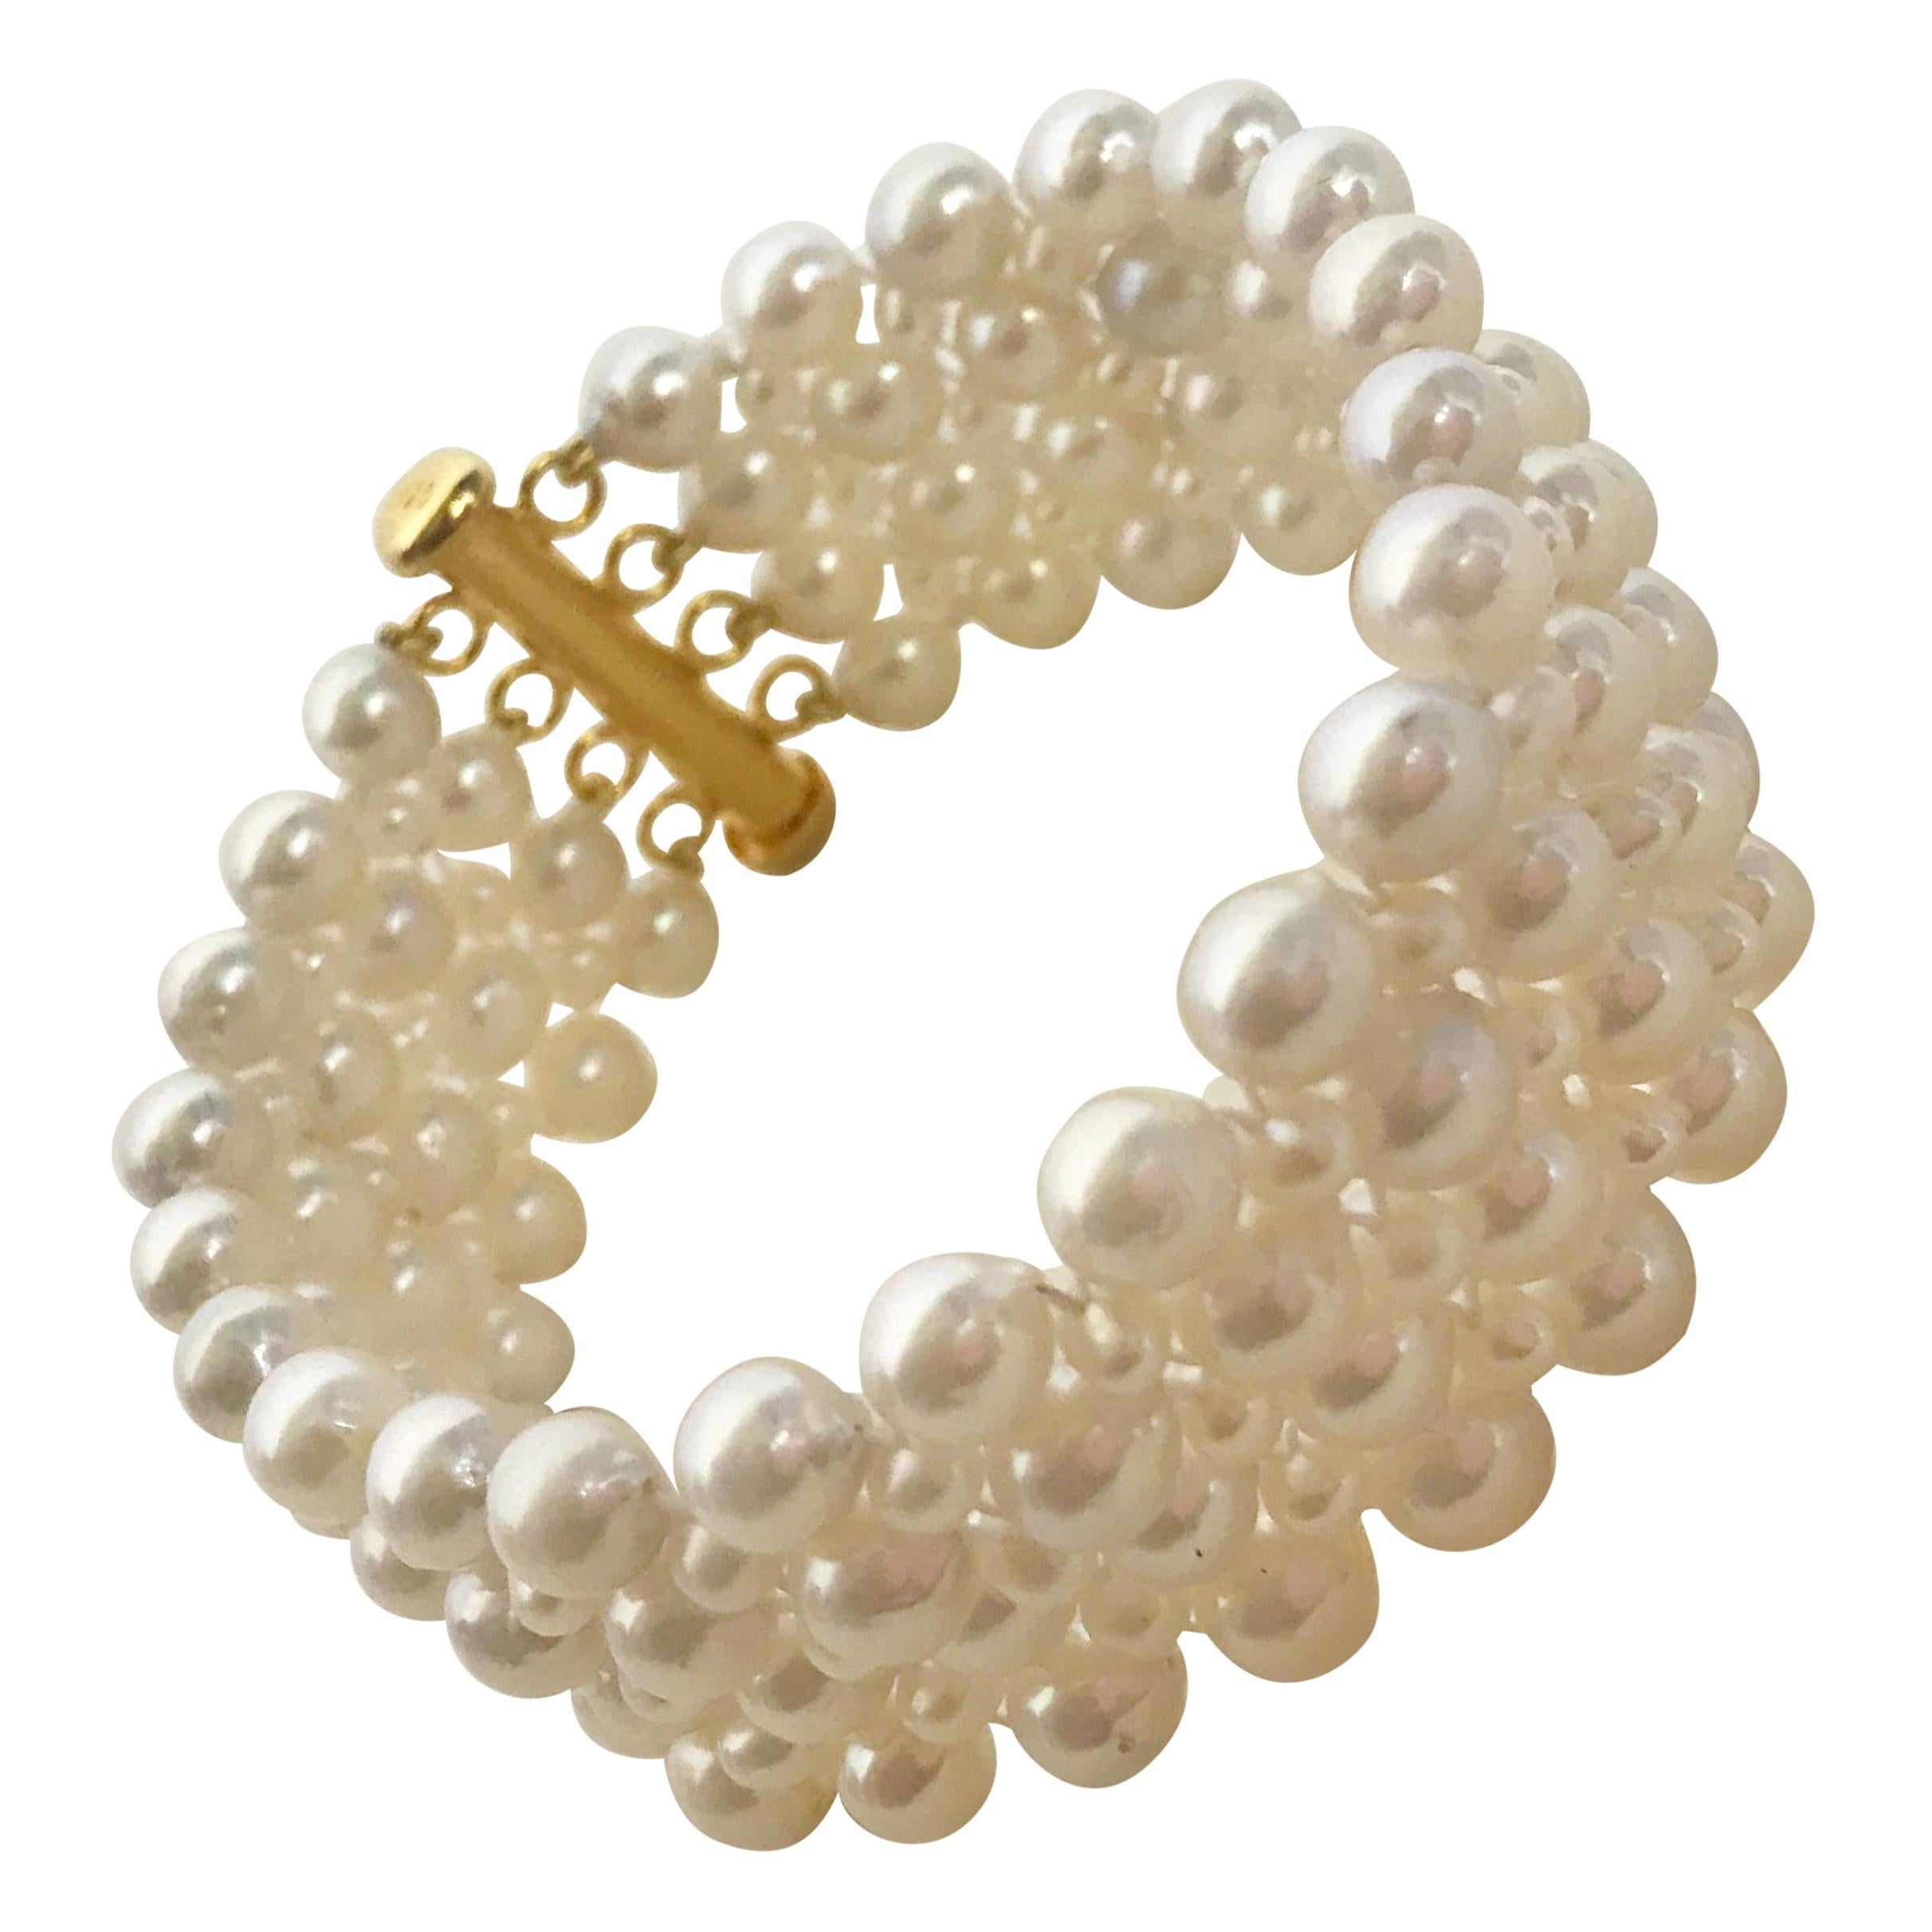 Marina J. Woven Pearl Bracelet with 14 Karat Yellow Gold-Plated Clasp